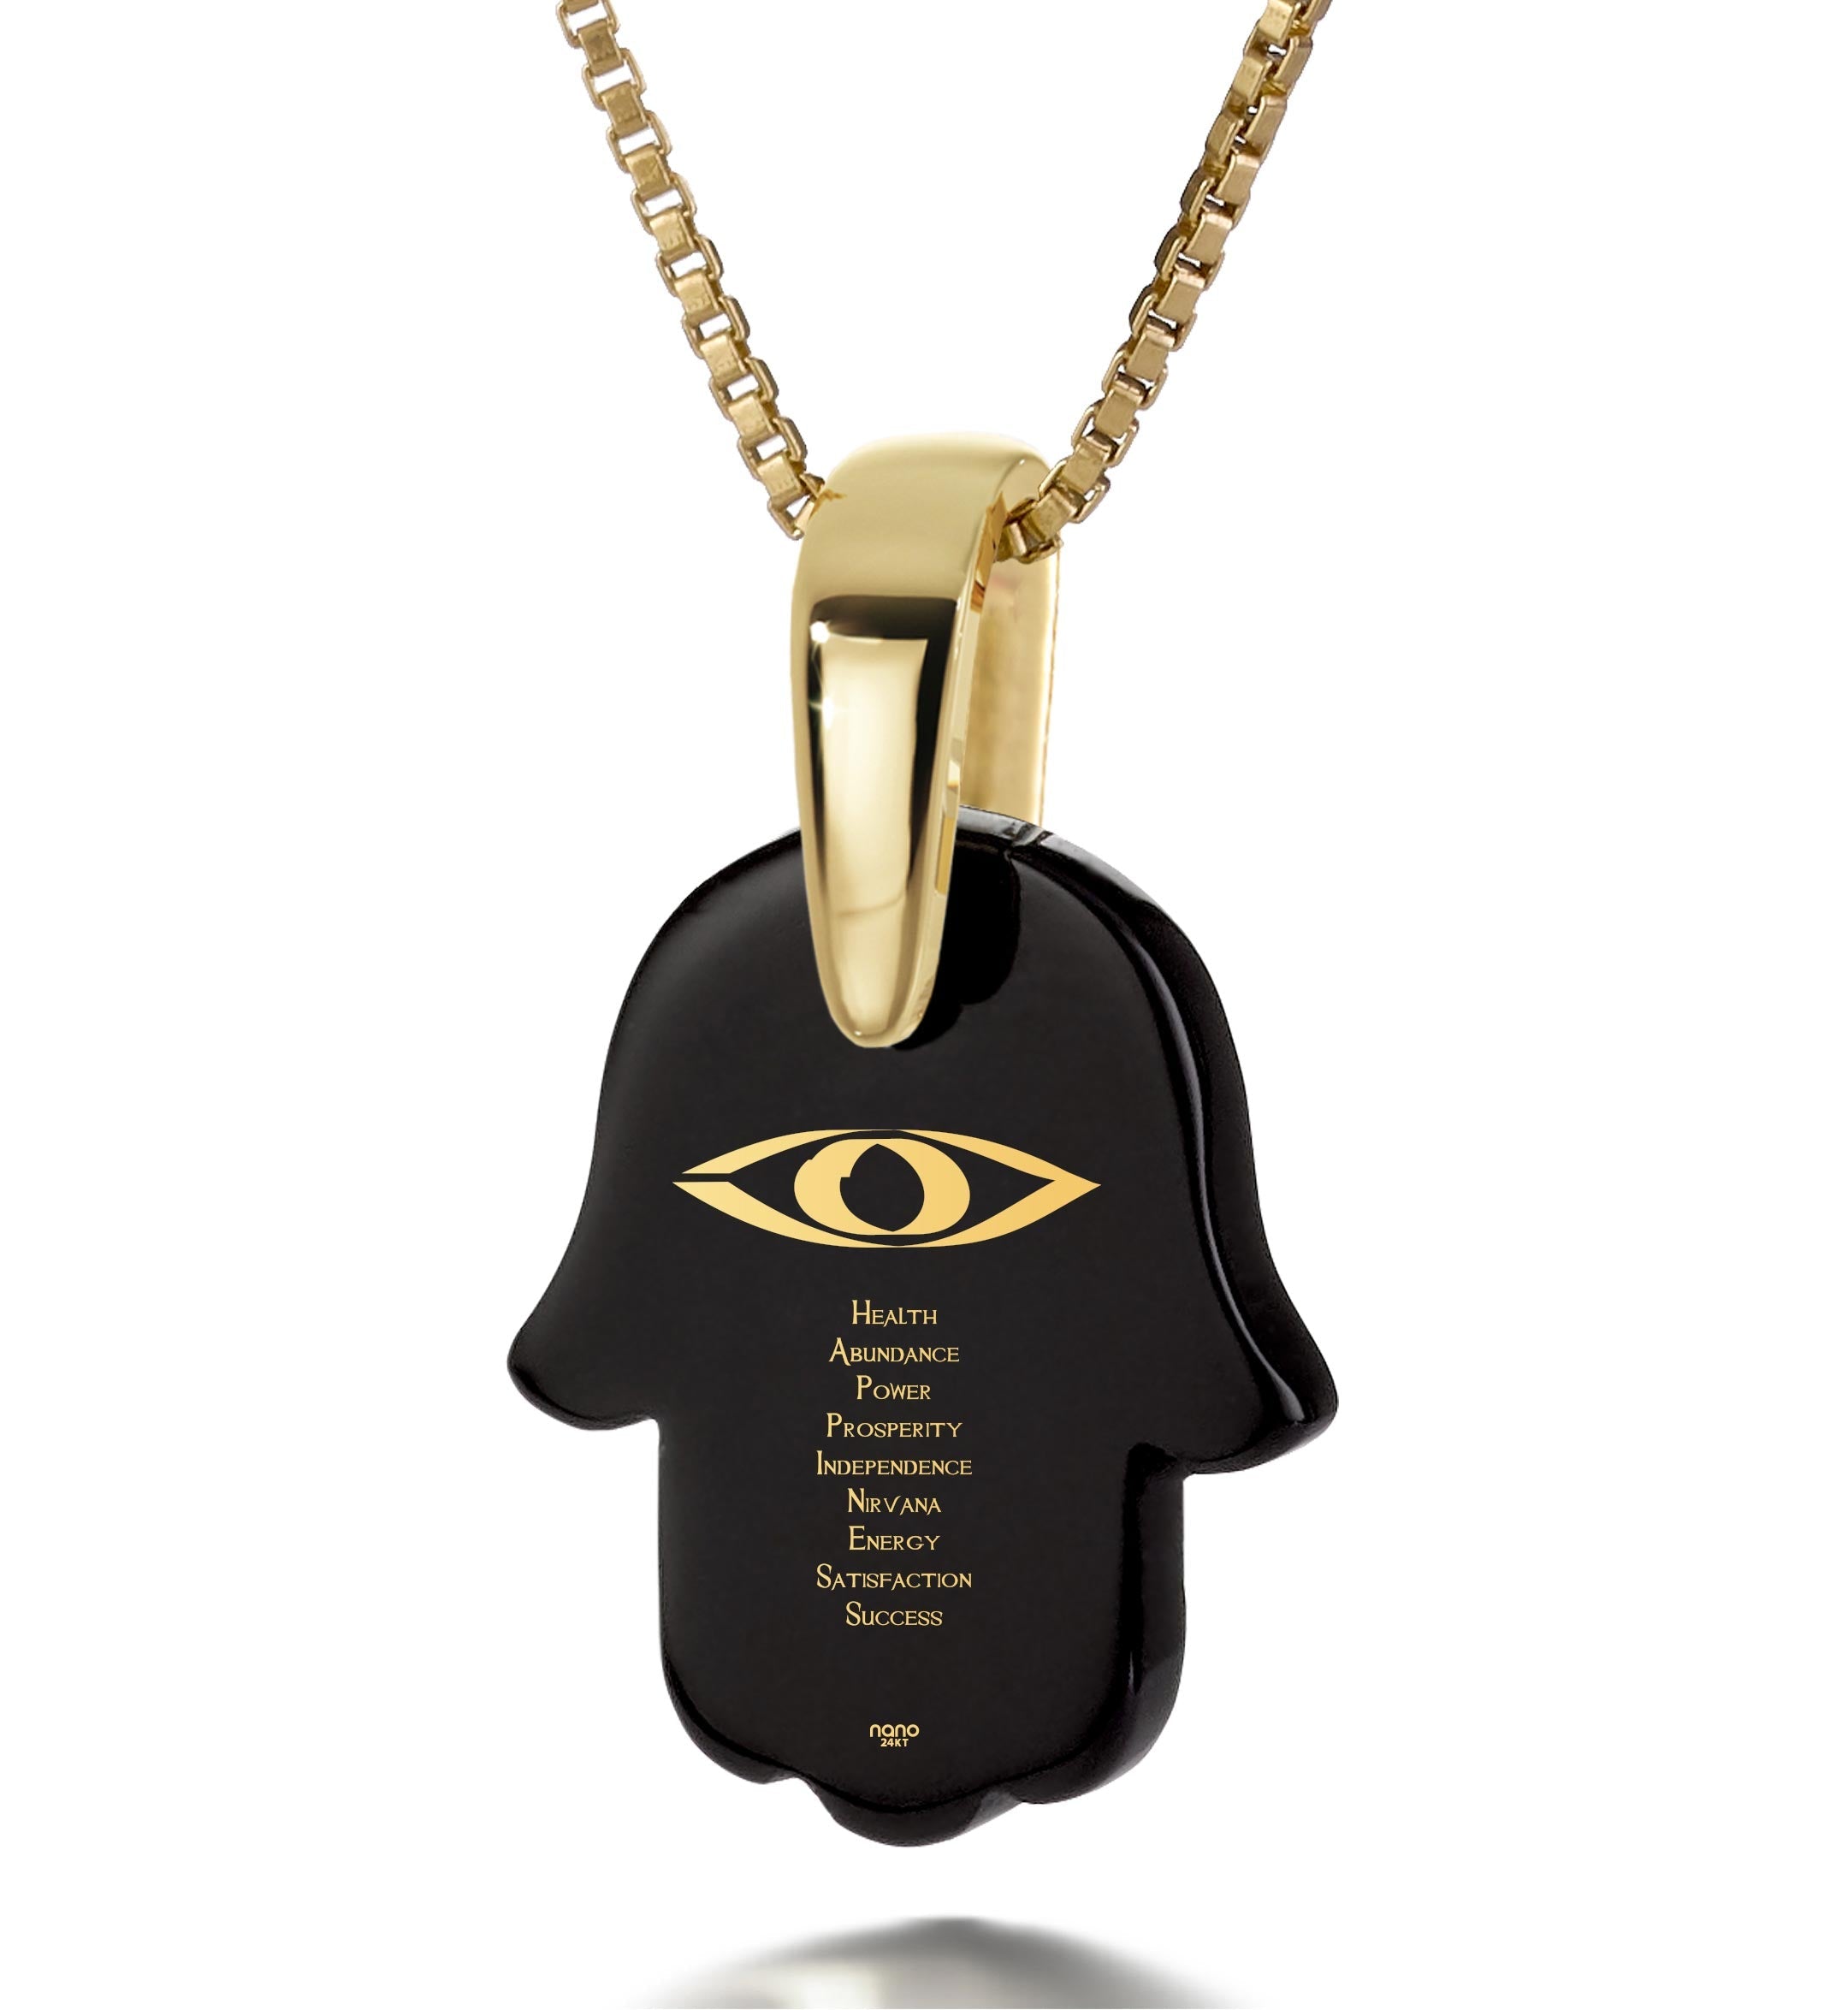 Hamsa Necklace Happiness Acronym Charm Pendant 24k Gold Inscribed featuring a black hamsa charm with an eye symbol, accompanied by three silver tags engraved with words and symbols, against a white background.